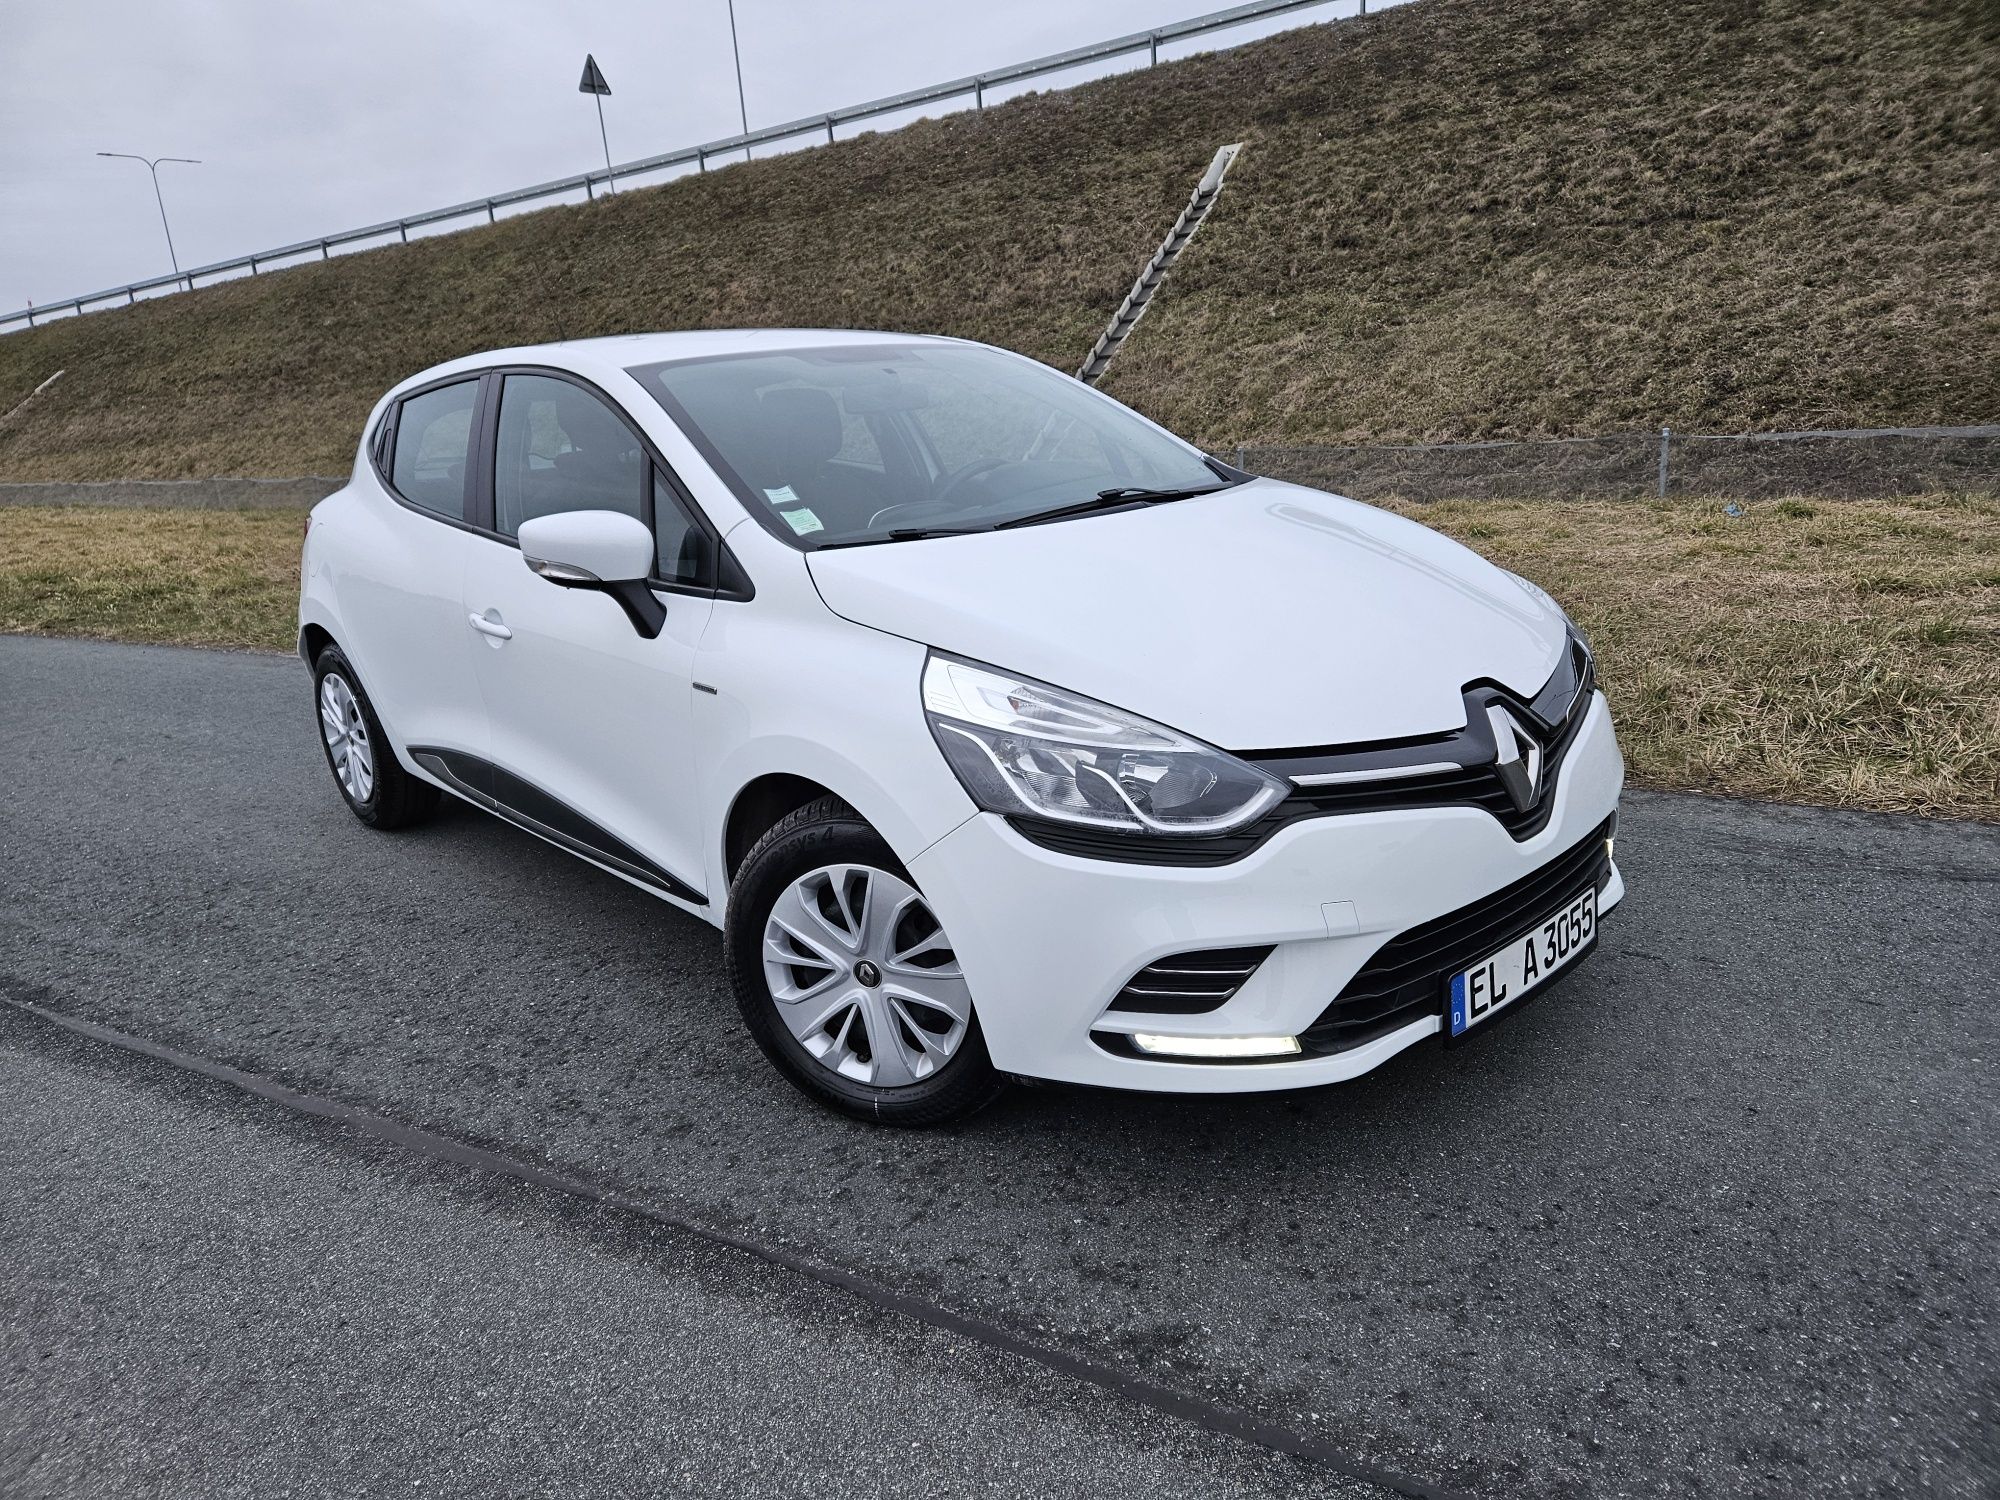 Renault Clio 4 Benzyna Lift 5-Drzwi Tablet Super Stan